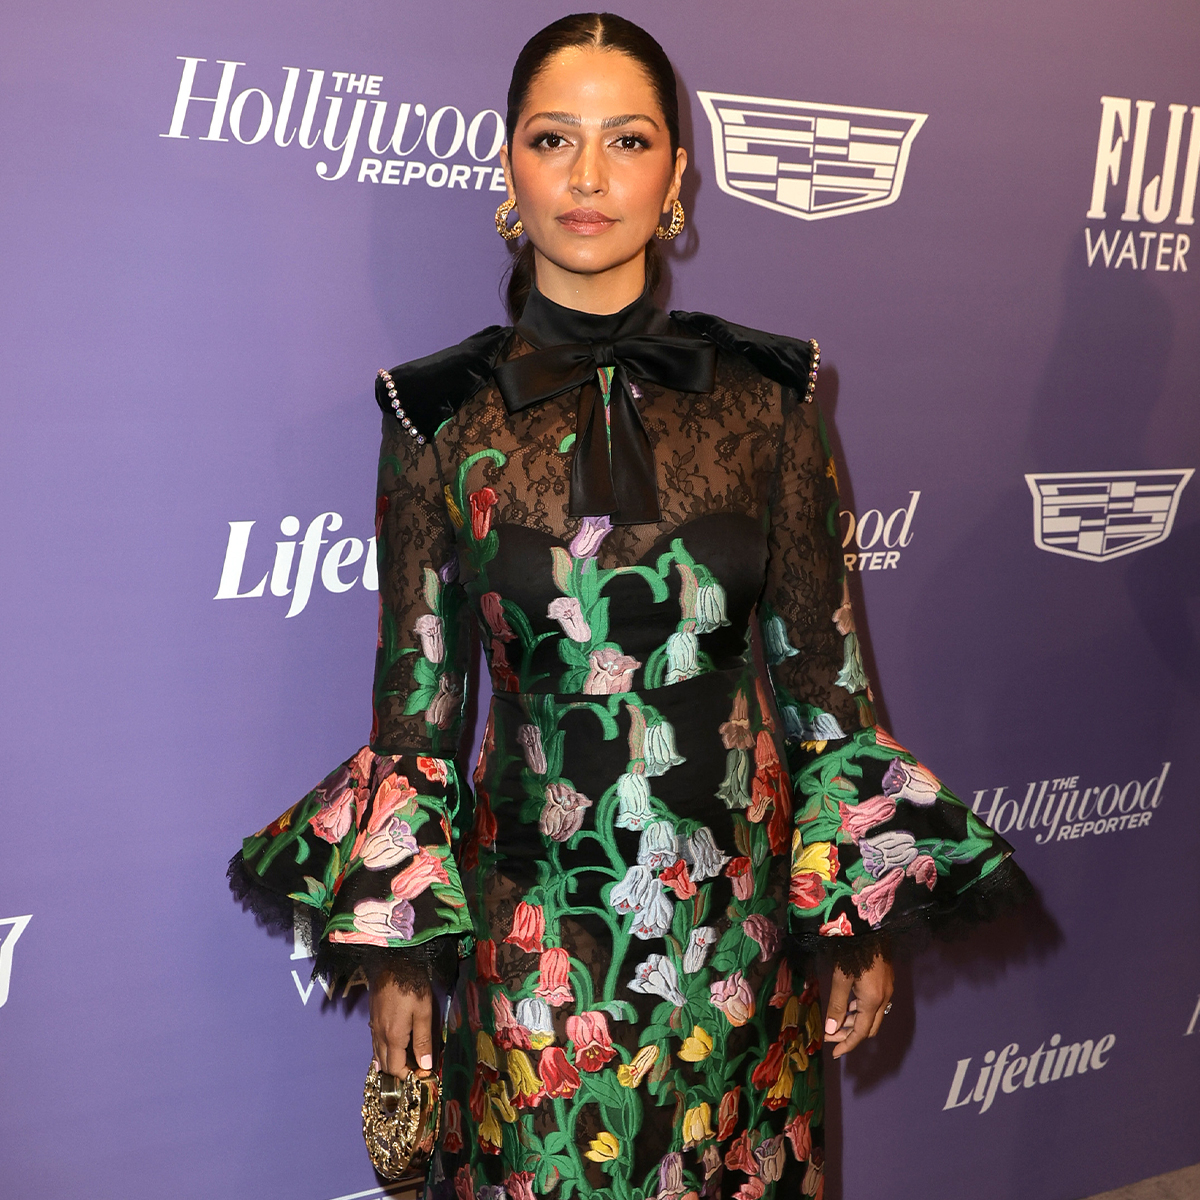 Matthew McConaughey's wife, Camila Alves, says she's fine after falling and  injuring her neck